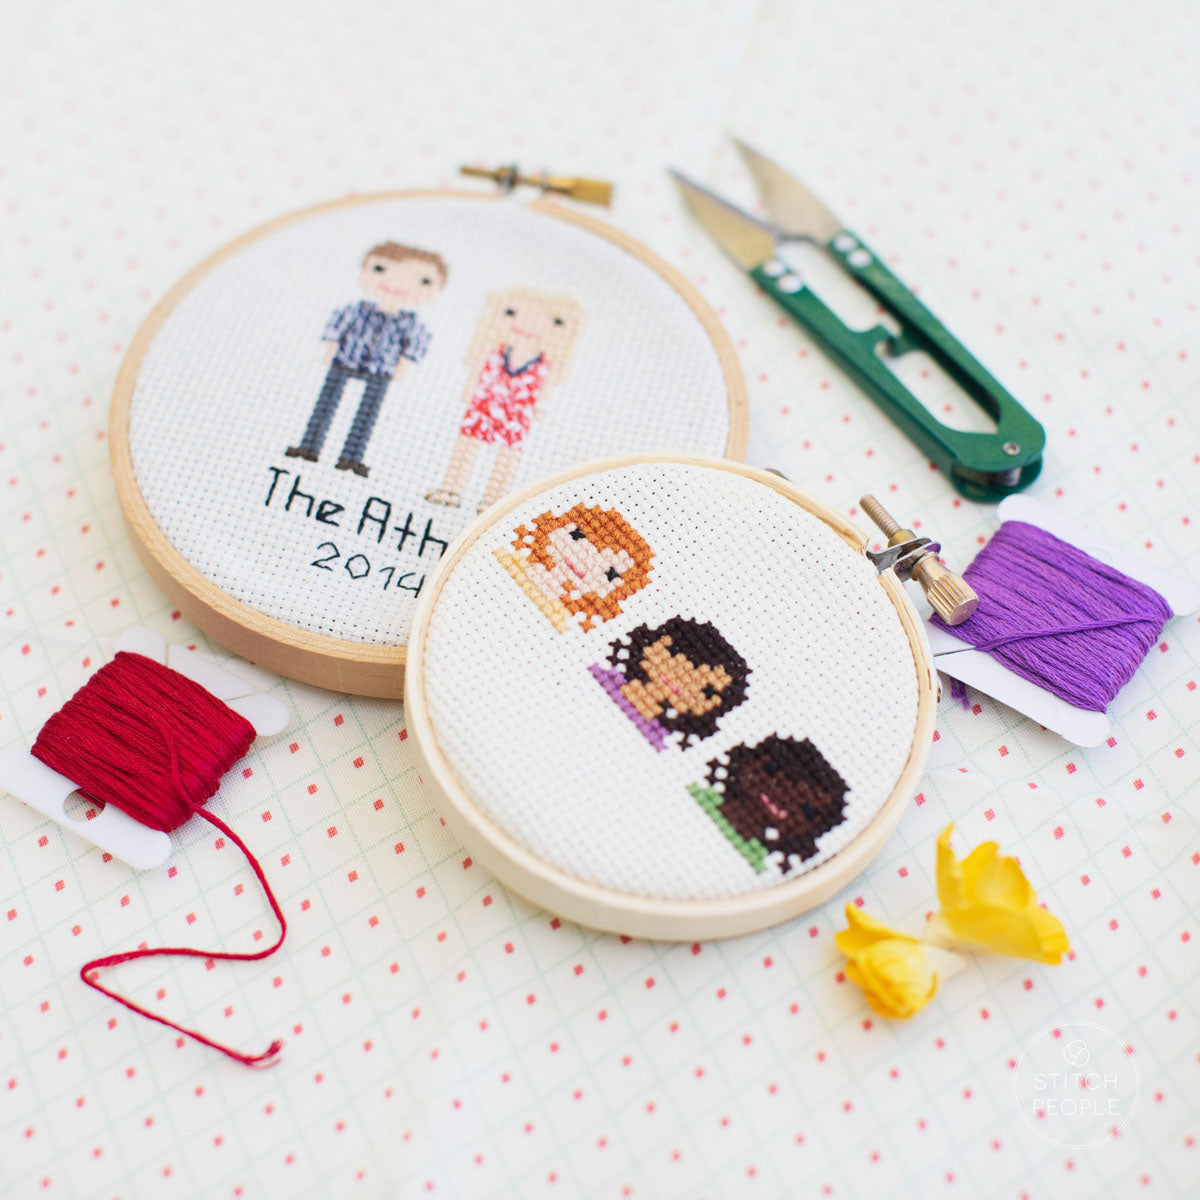 Thread Collection by Stitch People - Red and Auburn Hair